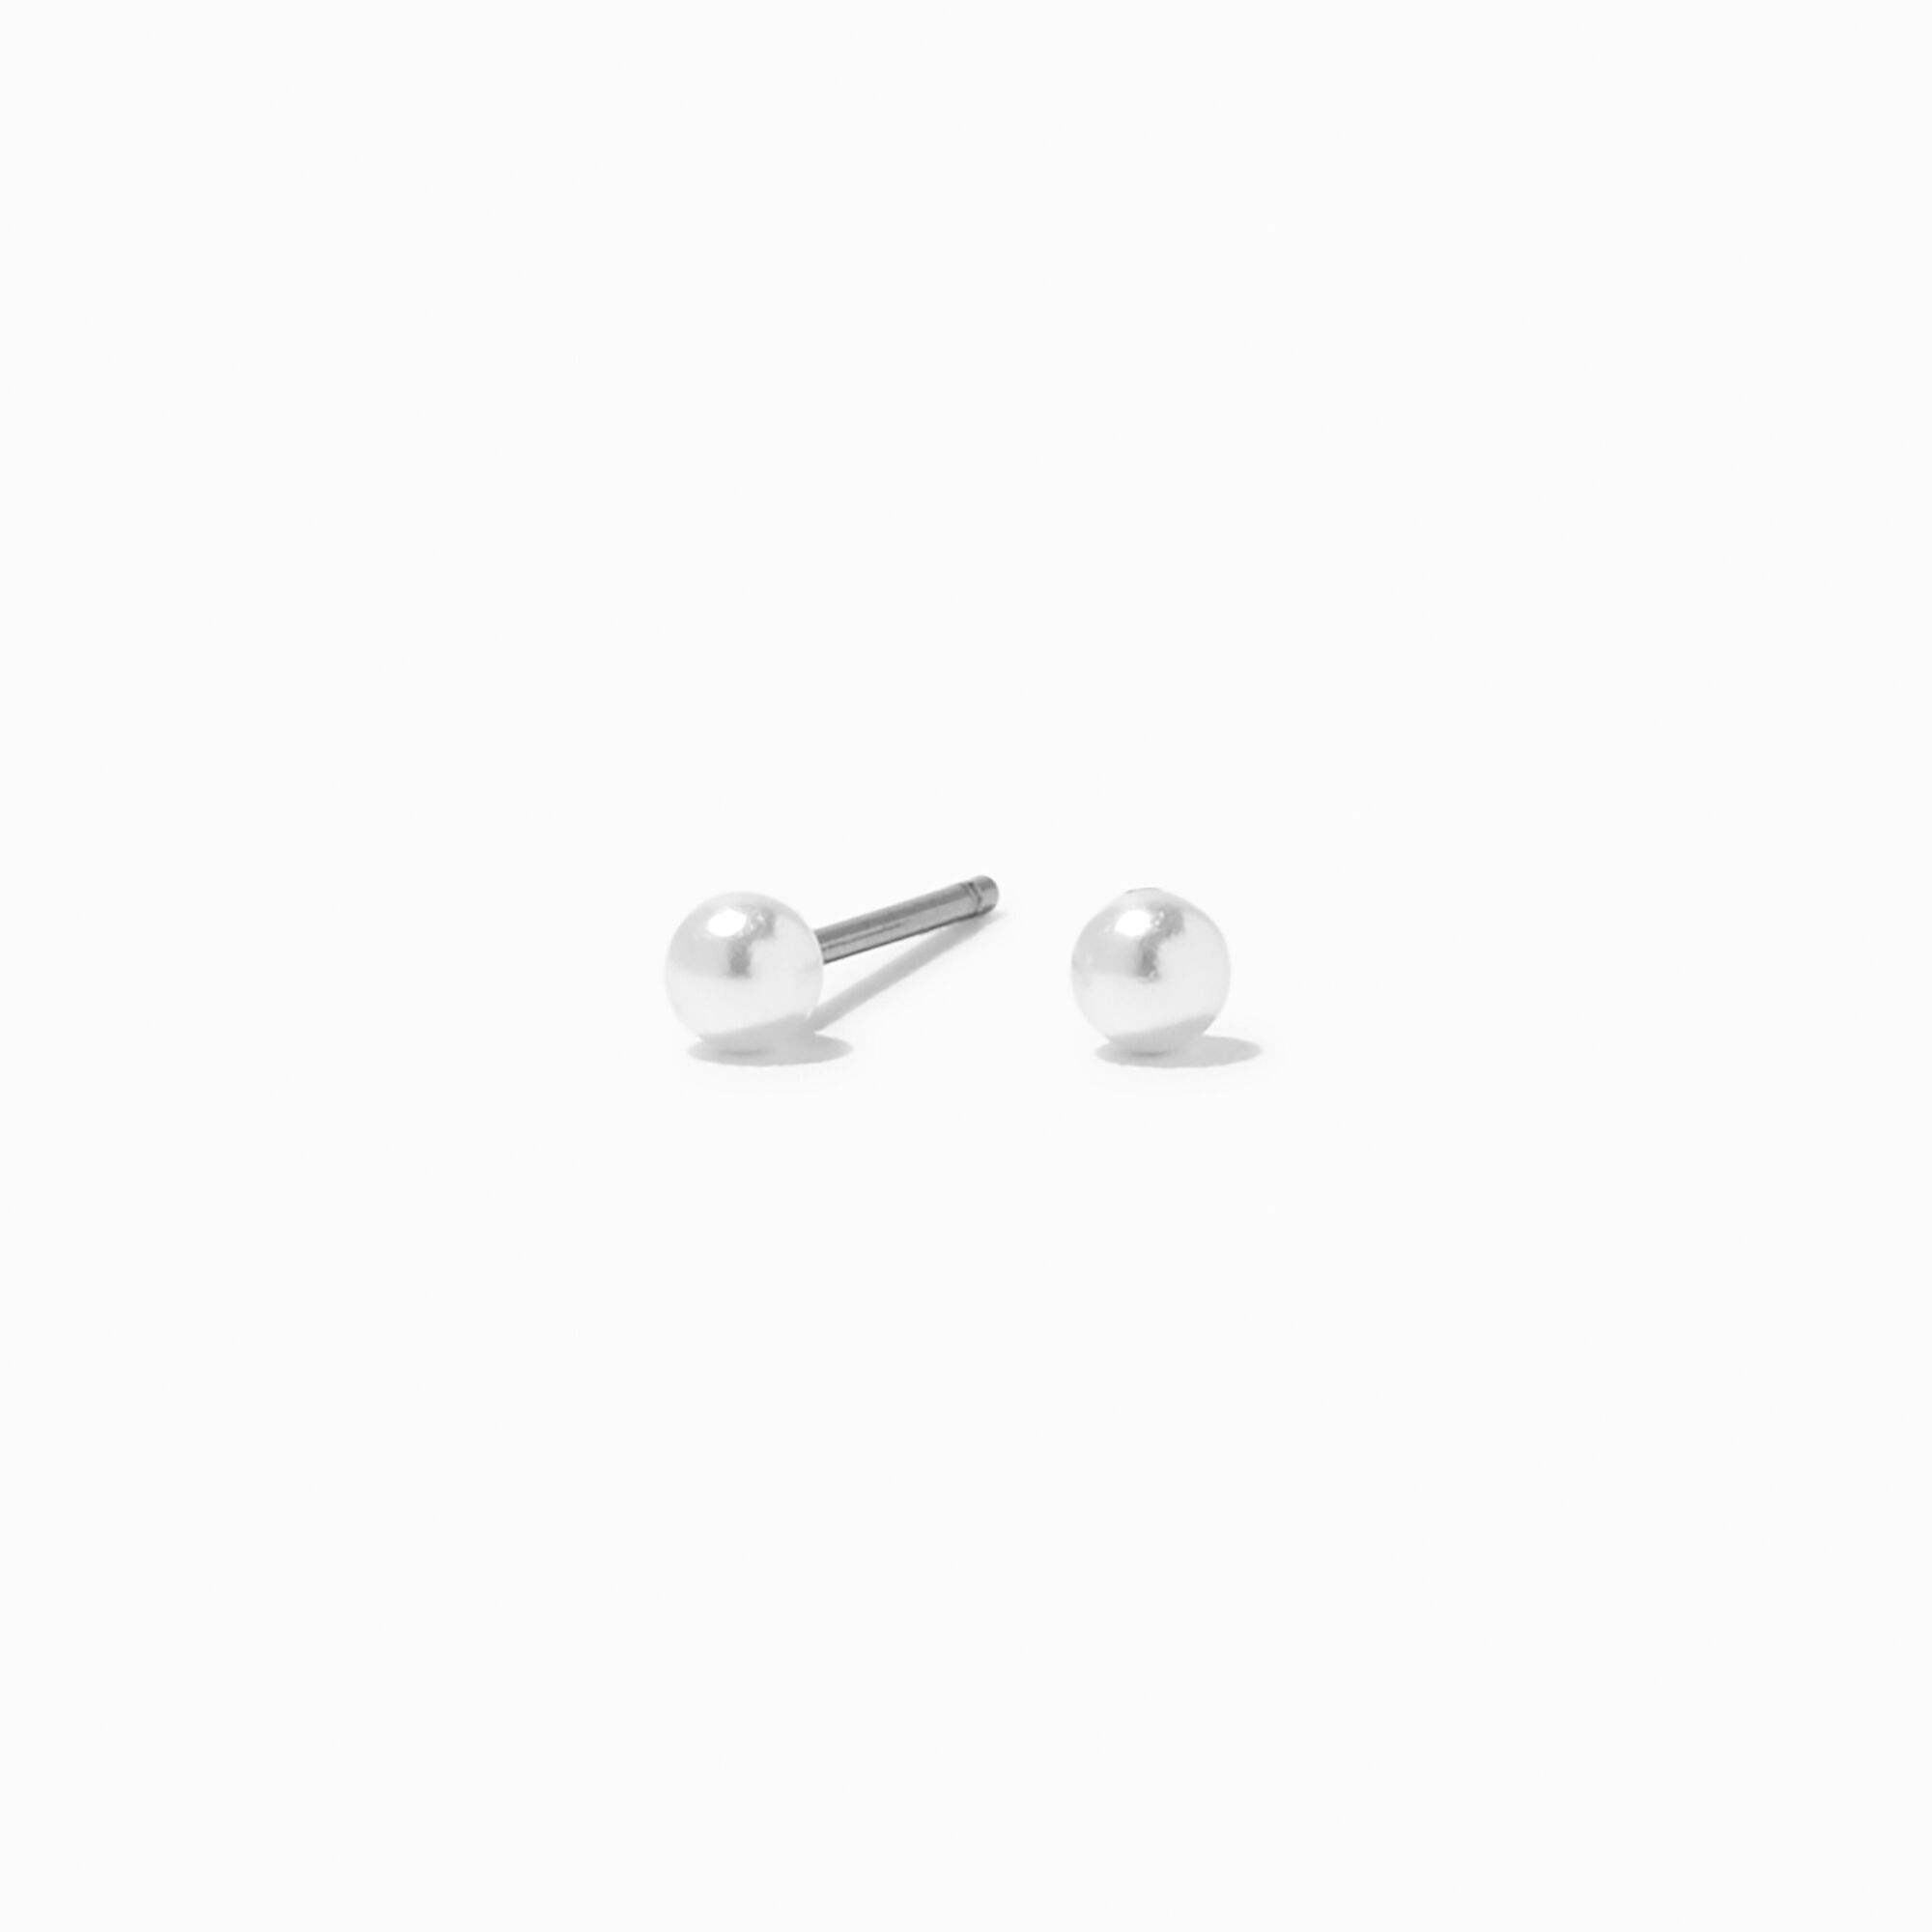 View Claires Pearl 3MM Stud Earrings White information